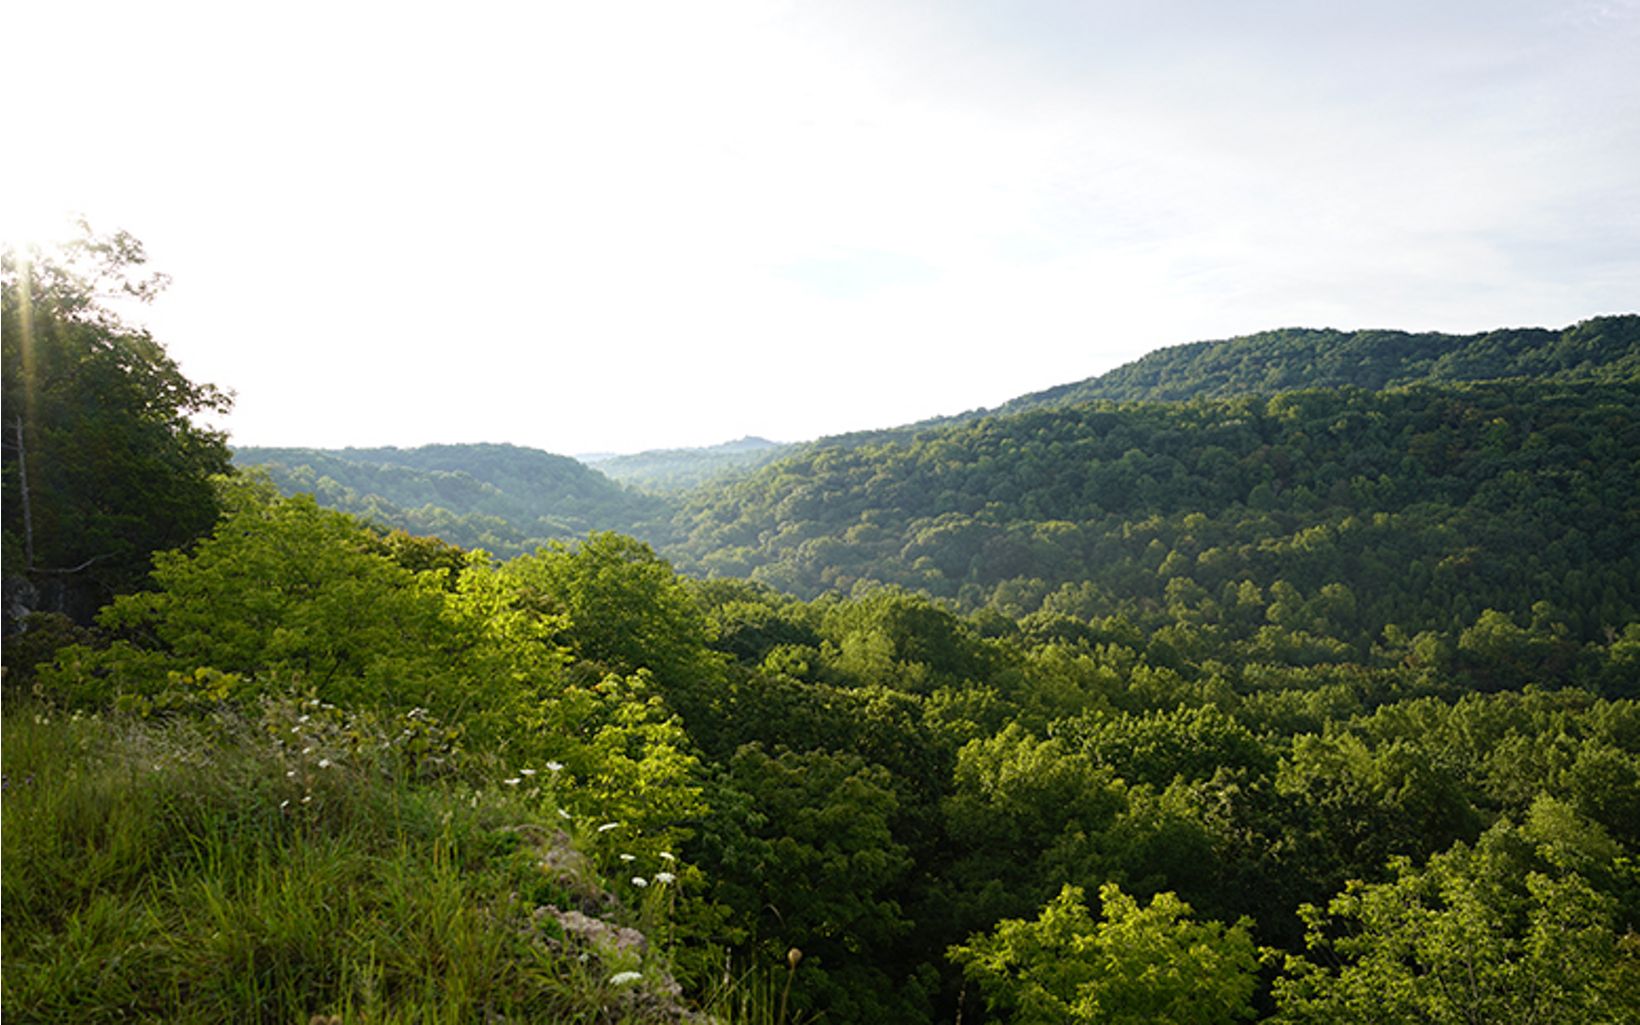 Edge of Appalachia Preserve The Edge of Appalachia Preserve is 20,000 acres of beautiful vistas and habitats in southern Ohio. More than 100 rare plant and animal species make their home here. © TJ Vissing